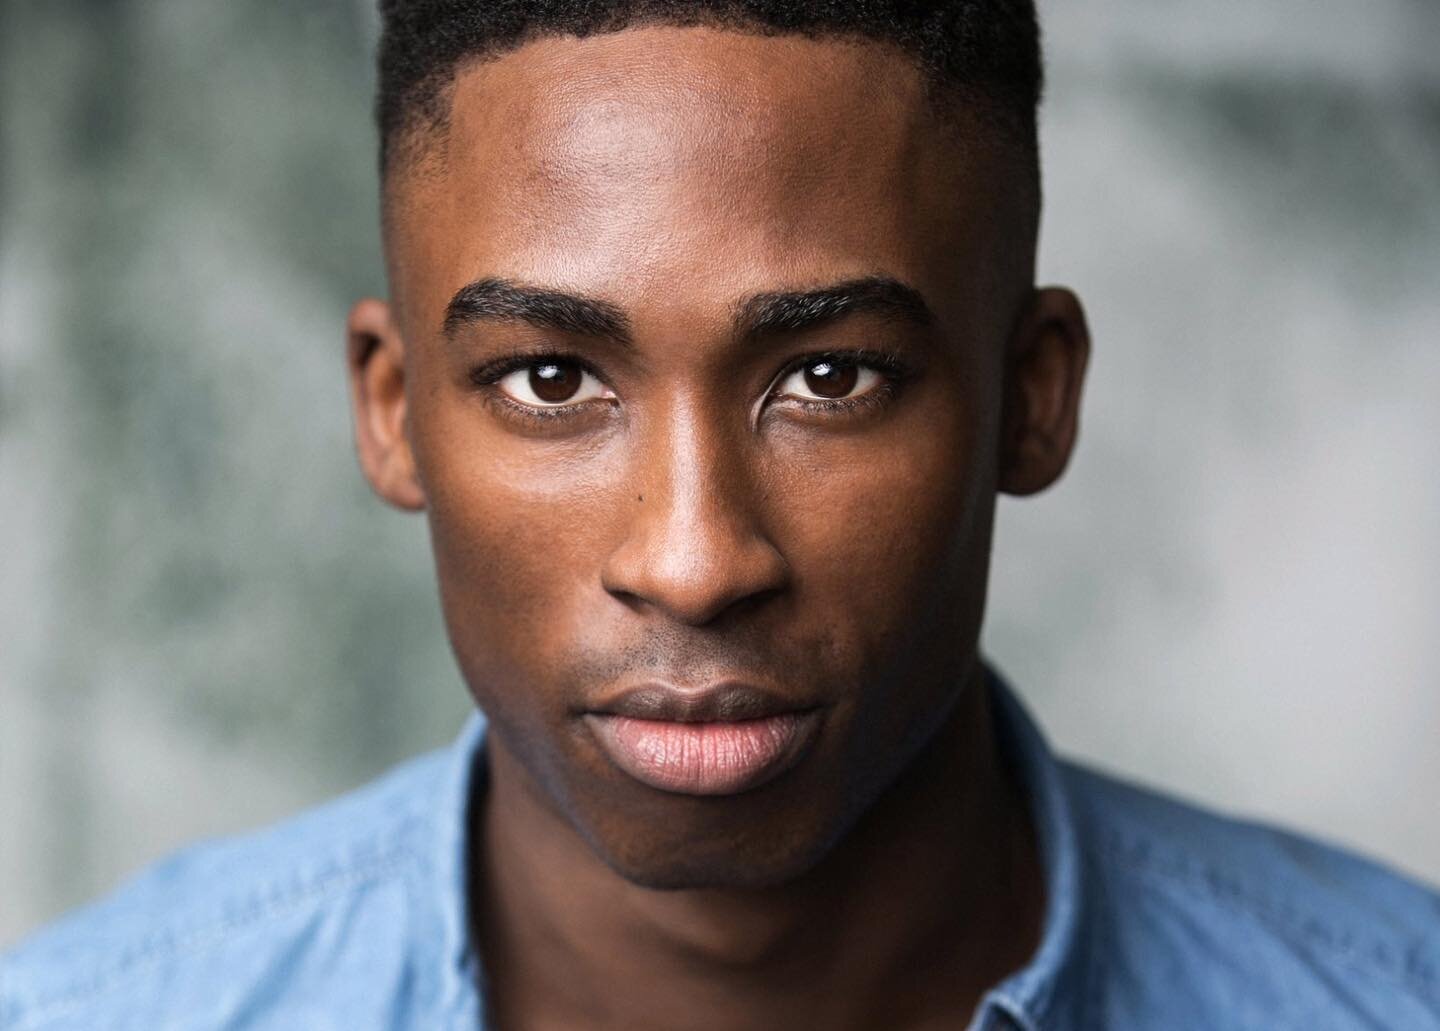 Introducing the wonderfully talented, Jordan Shaw (he/him) as an Actor at FeedbackPro!

Jordan trained at Ridgeway Studios, The Brit School and ArtsEd and has since had an impressive and varied career in West End theatre, touring shows &amp; TV/film,